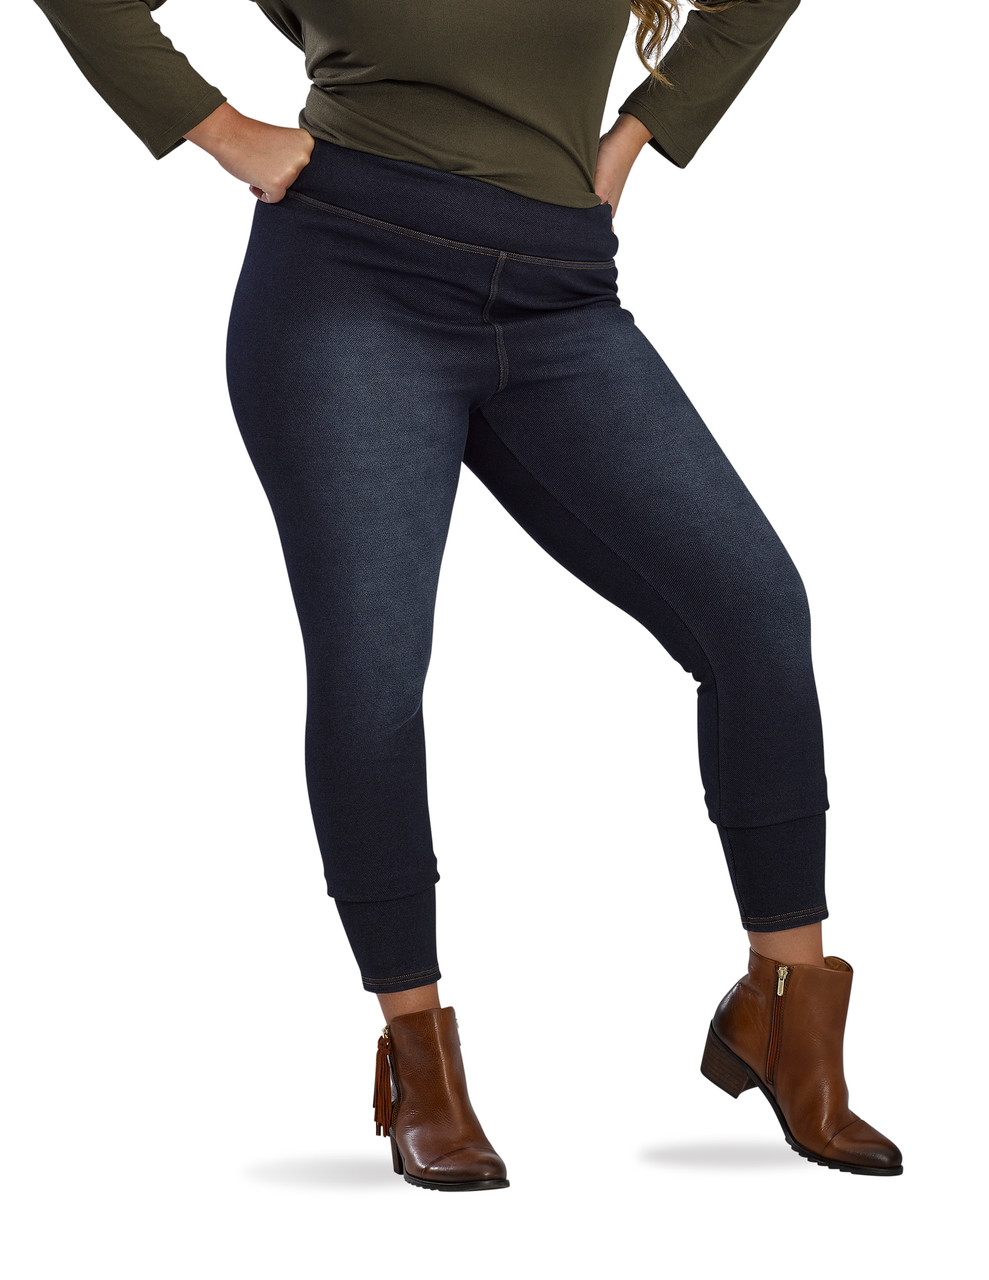 Hue Denim Leggings Review  International Society of Precision Agriculture